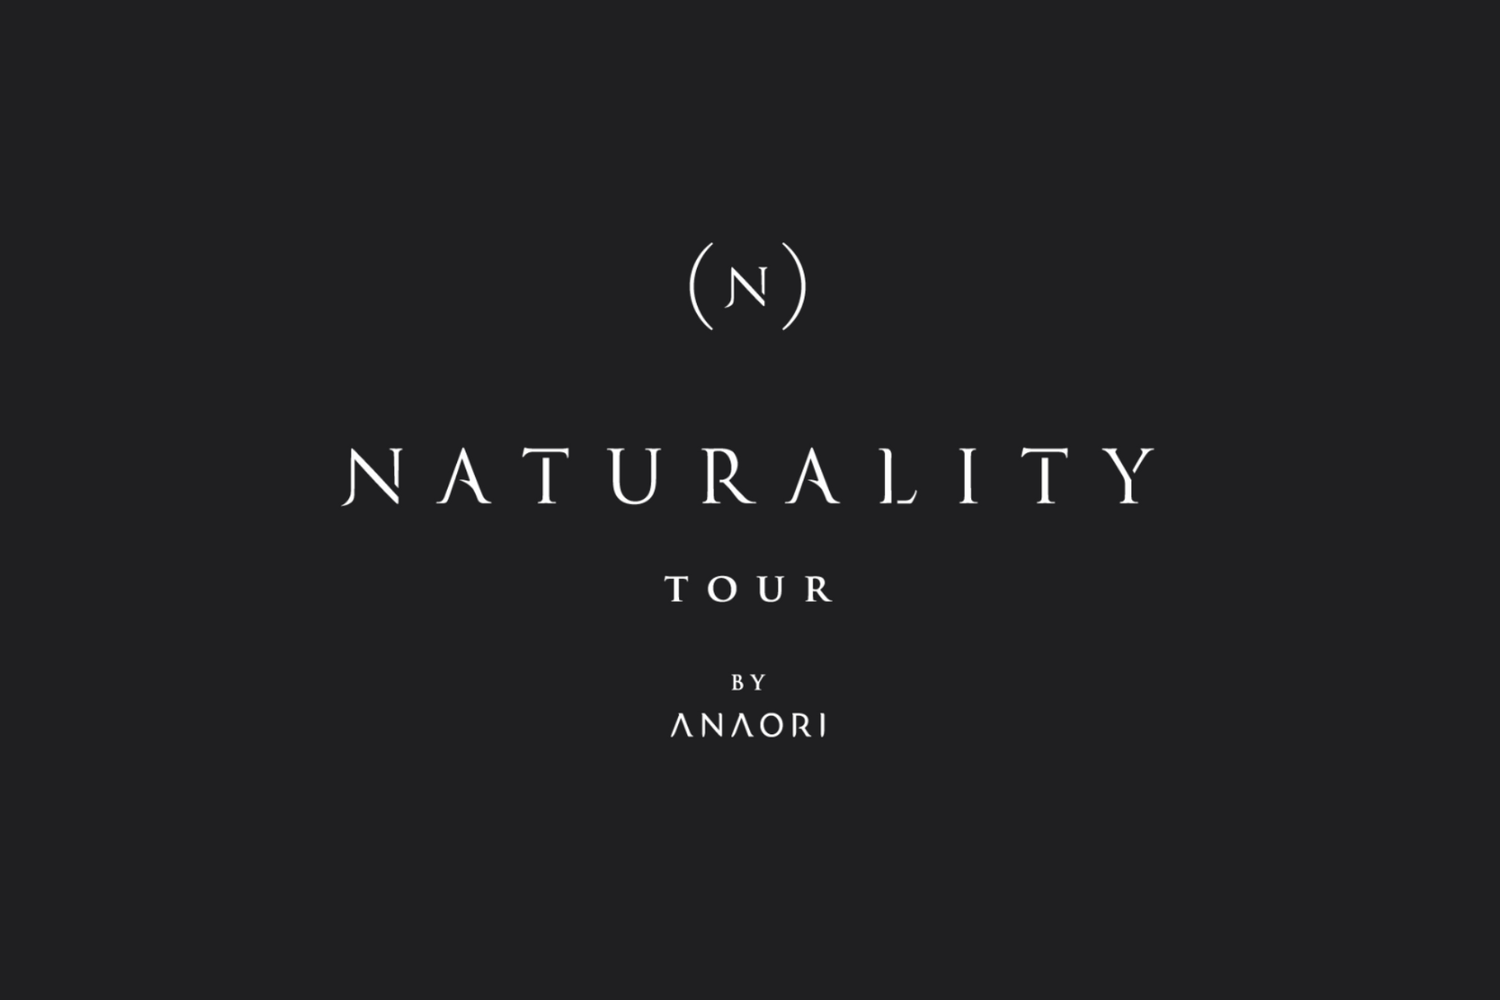 September 2021: The Naturality Tour by ANAORI concluded in Paris.